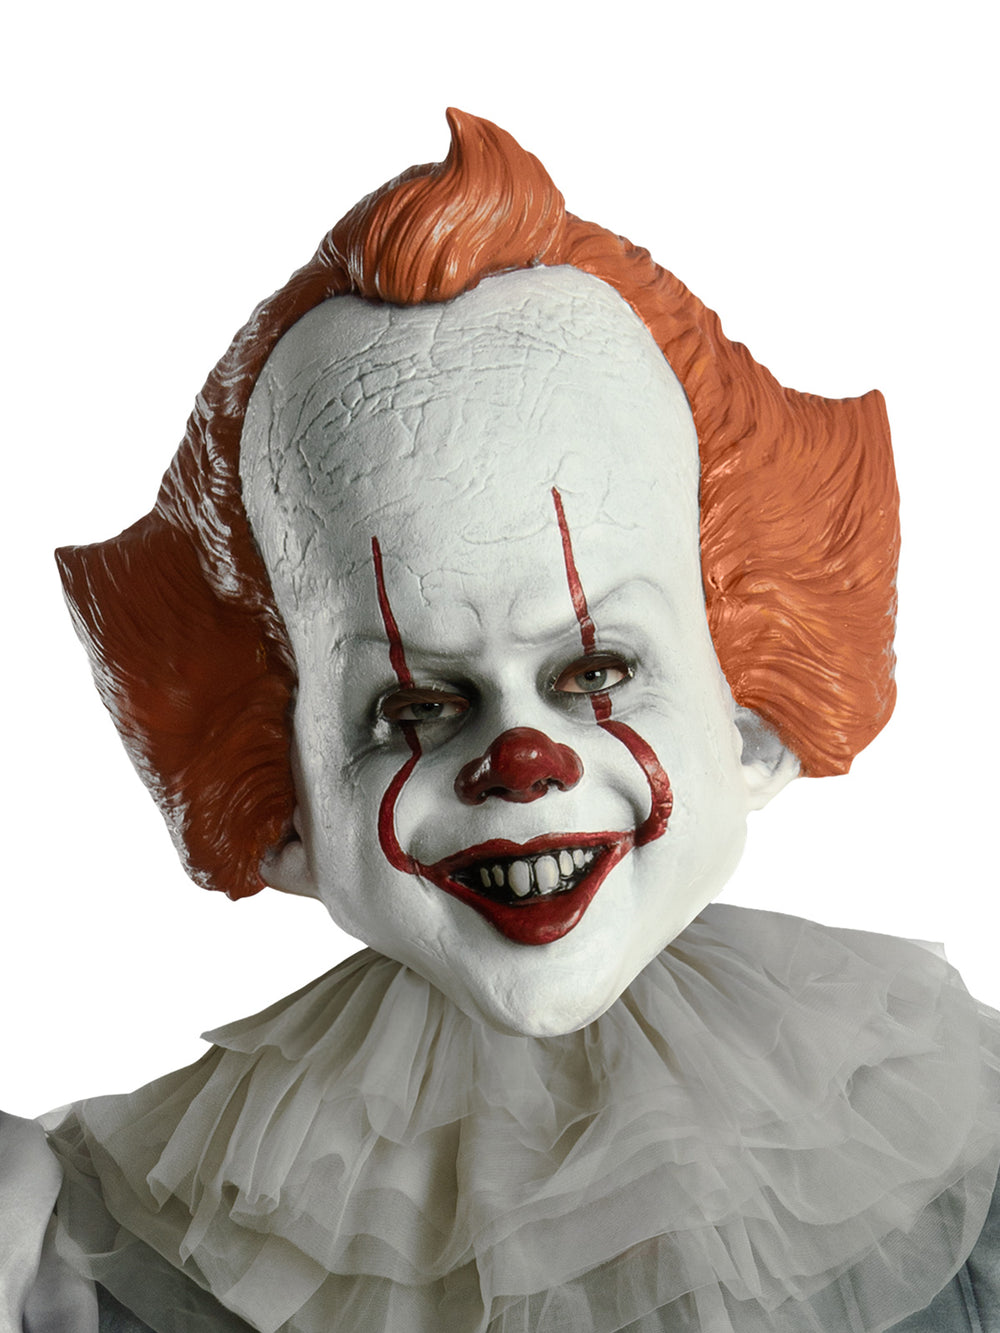 PENNYWISE 'IT' CHAPTER 2 DELUXE COSTUME, ADULT - Little Shop of Horrors